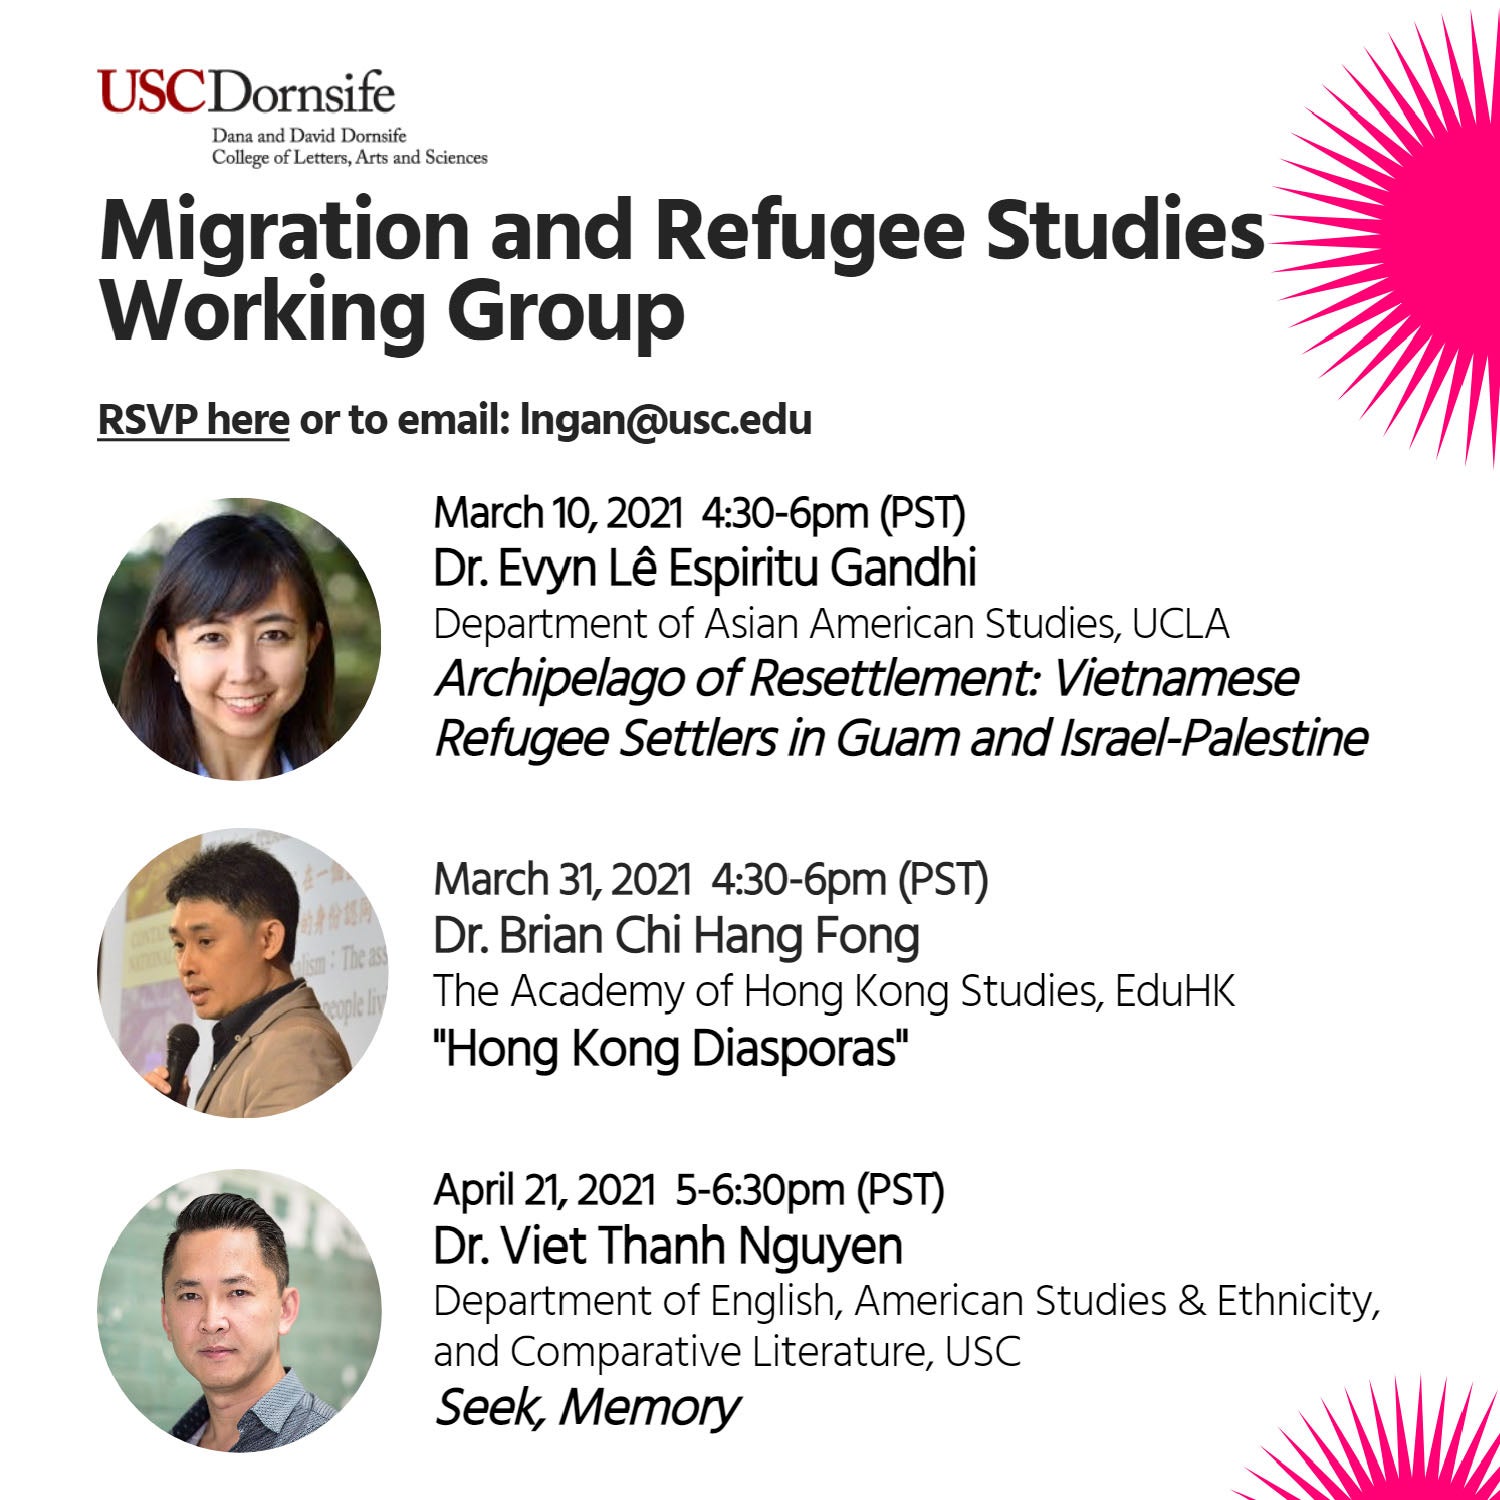 Migration and Refugee Studies Working Group Event poster